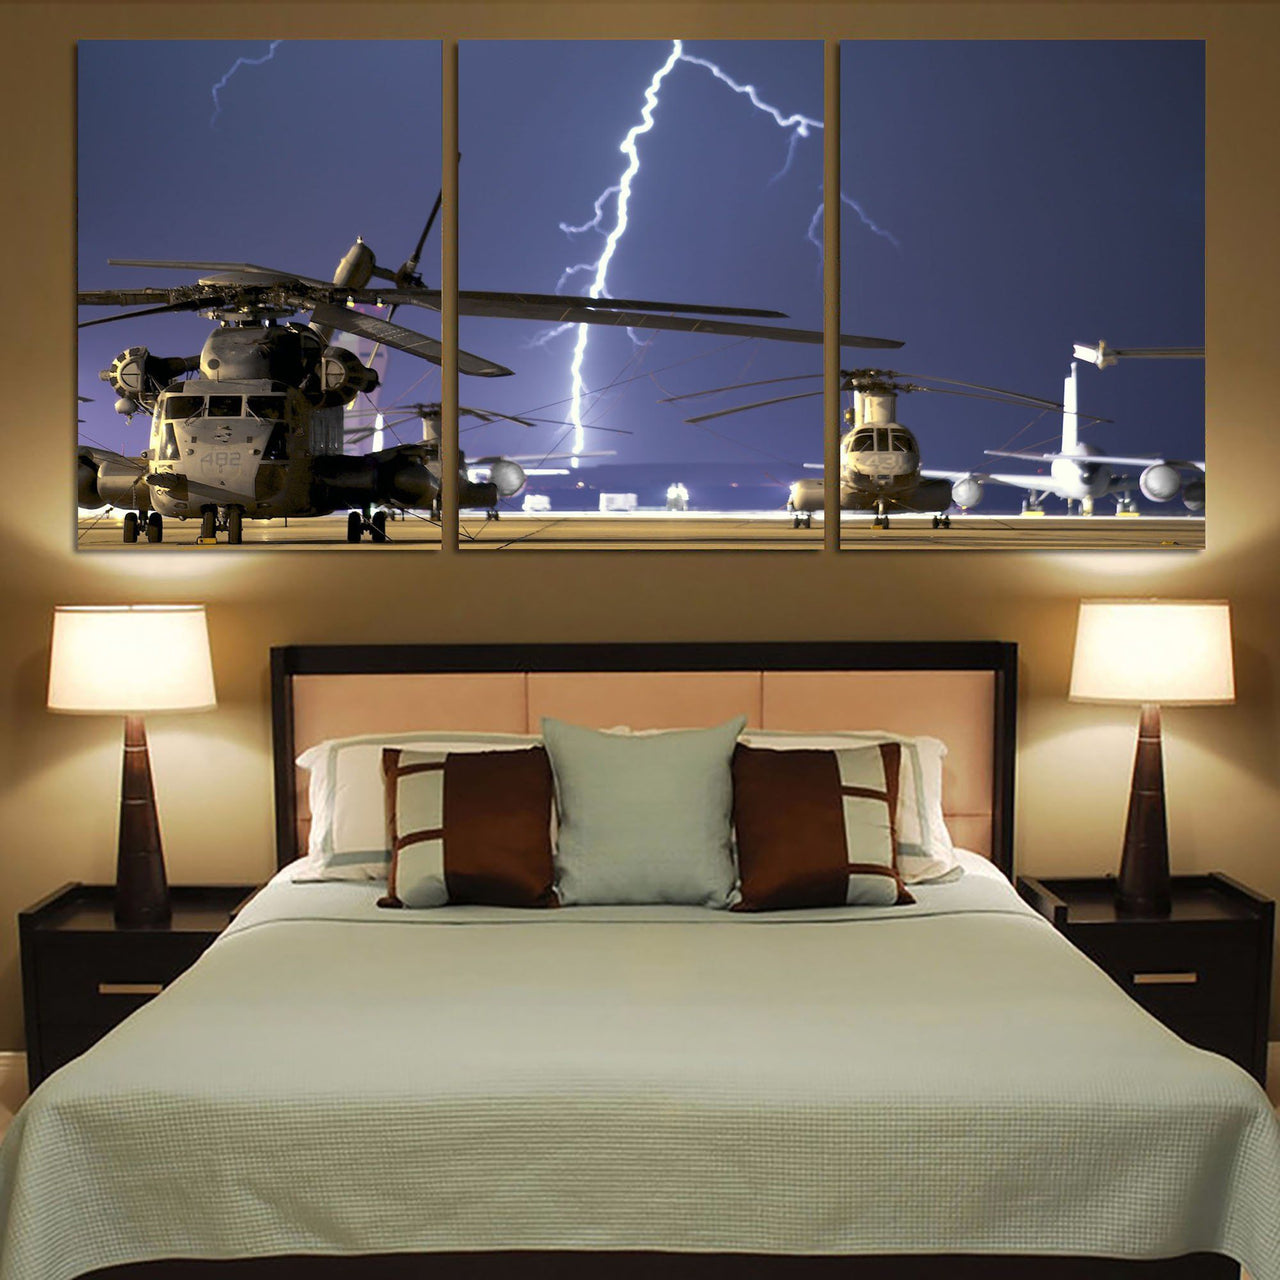 Helicopter & Lighting Strike Printed Canvas Posters (3 Pieces) Aviation Shop 